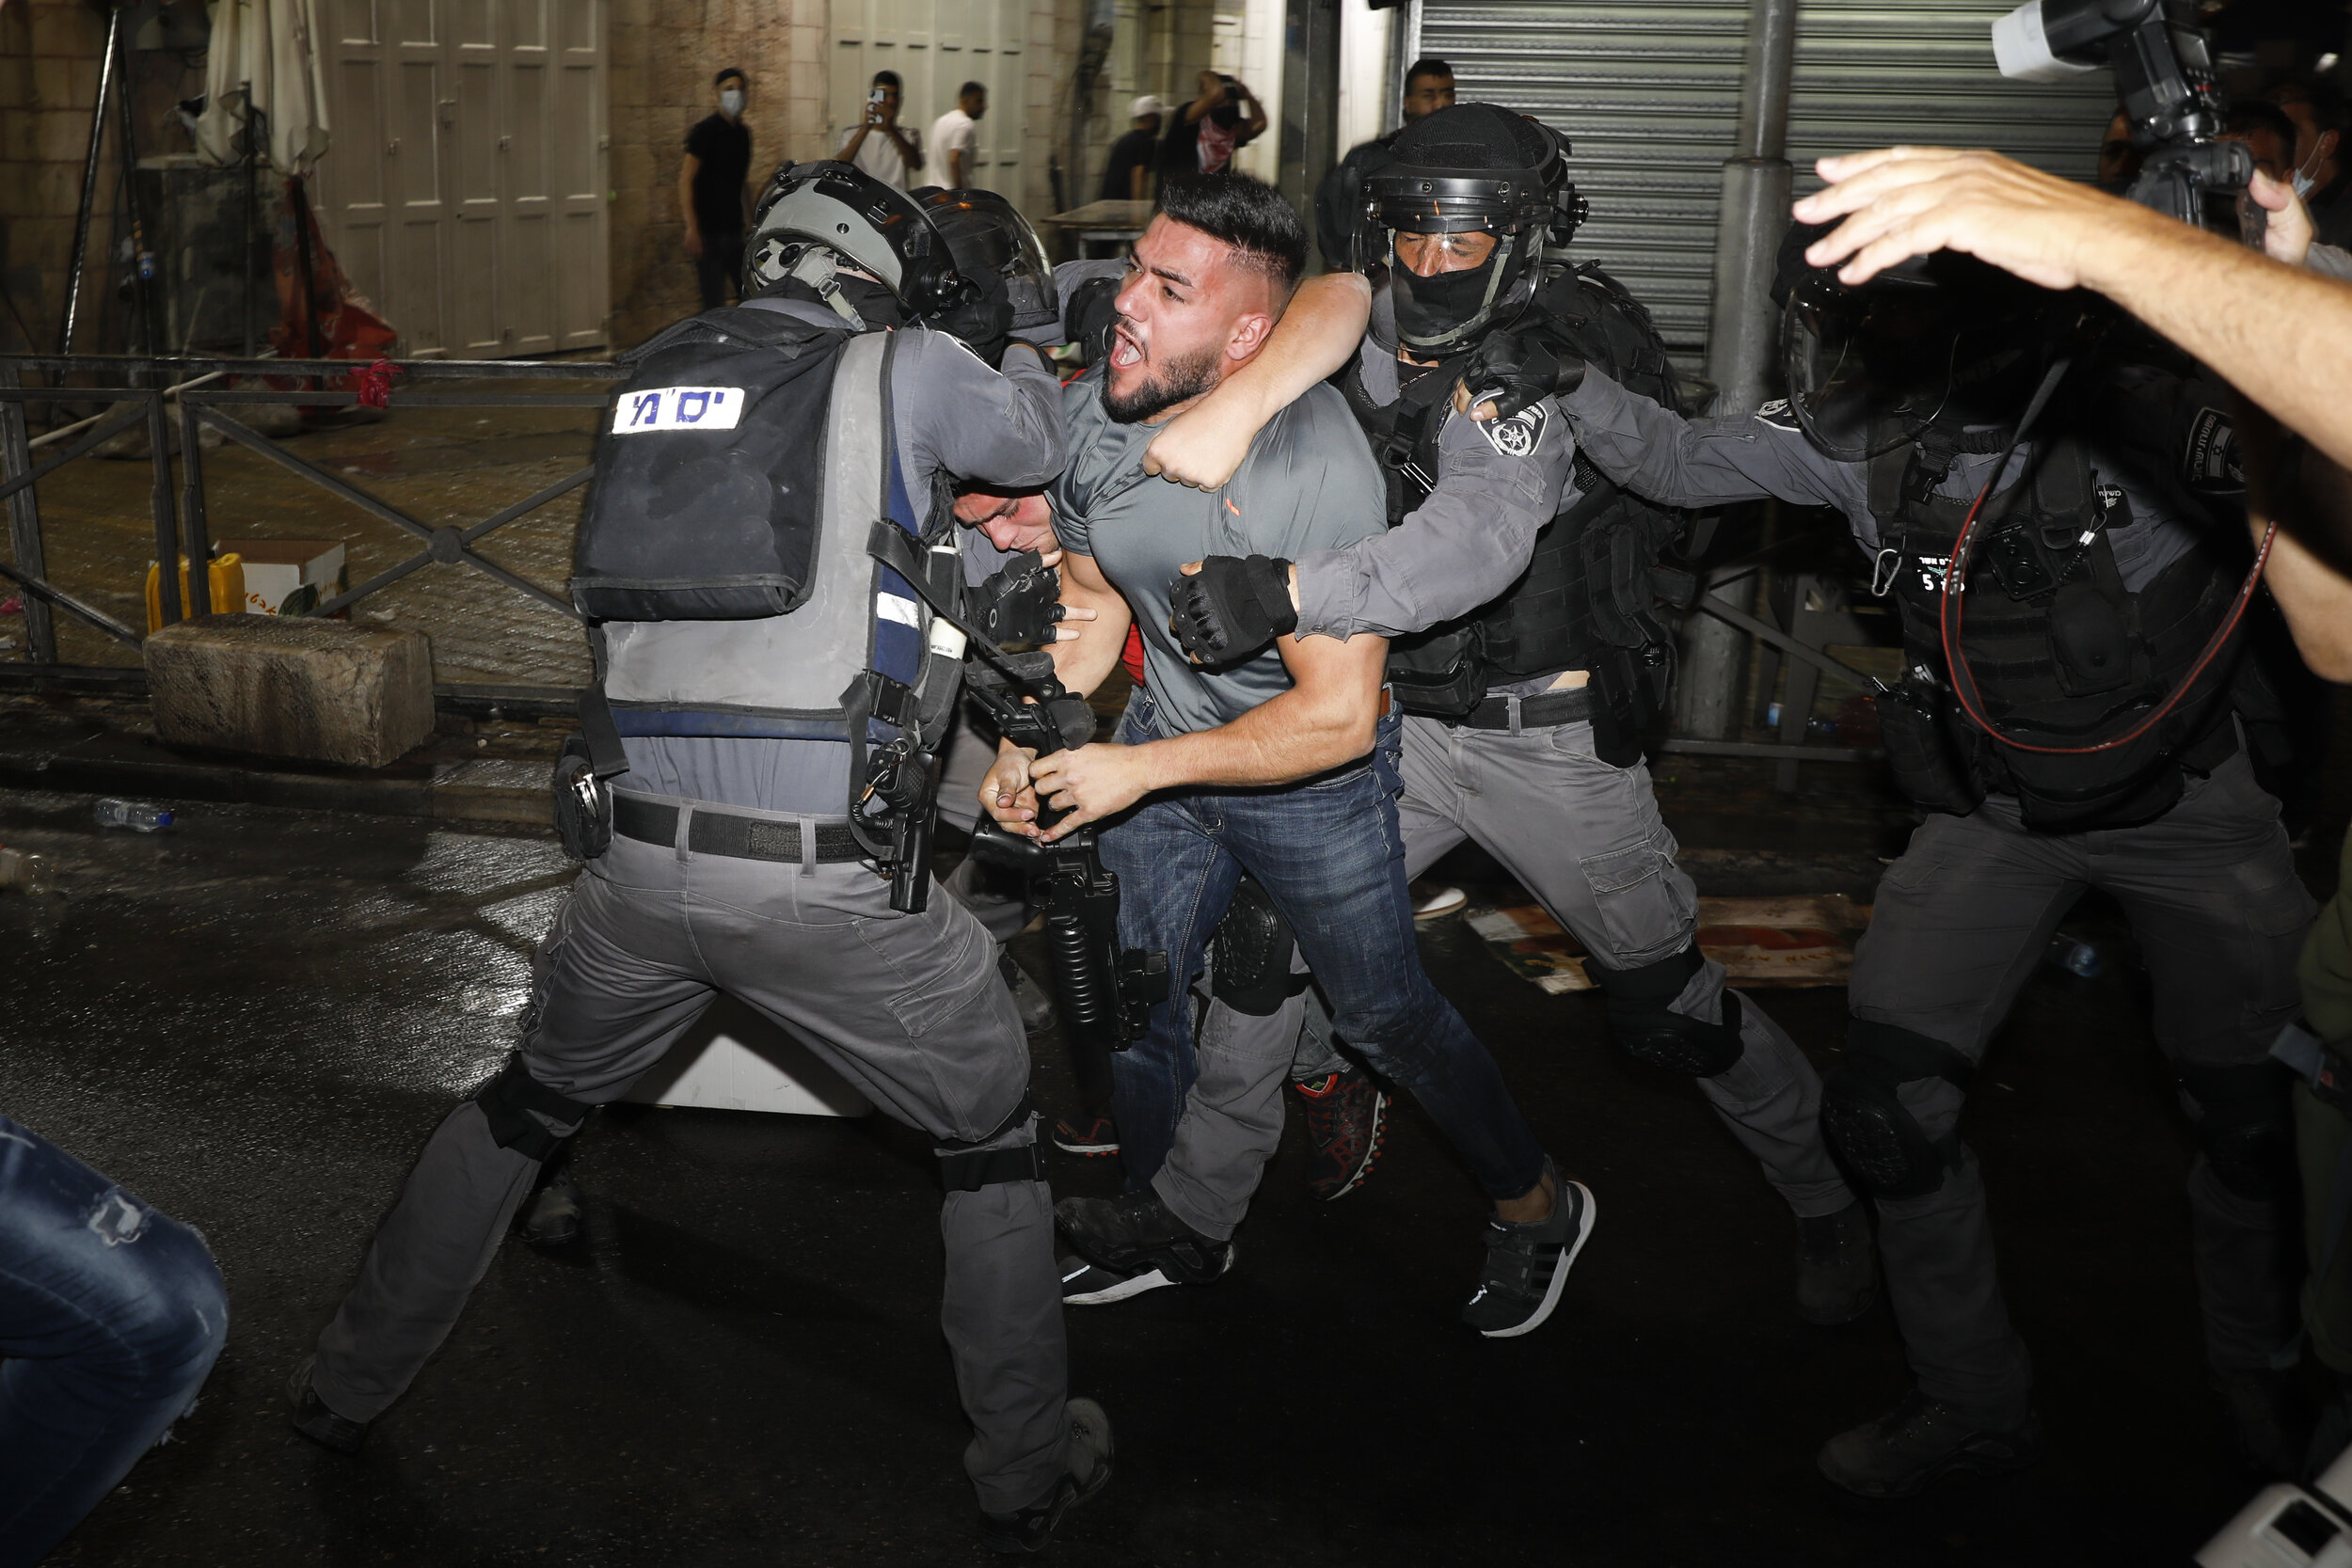  Israeli police officers clash with Palestinian protesters near Damascus Gate just outside Jerusalem's Old City, Sunday, May 9, 2021. (AP Photo/Ariel Schalit) 